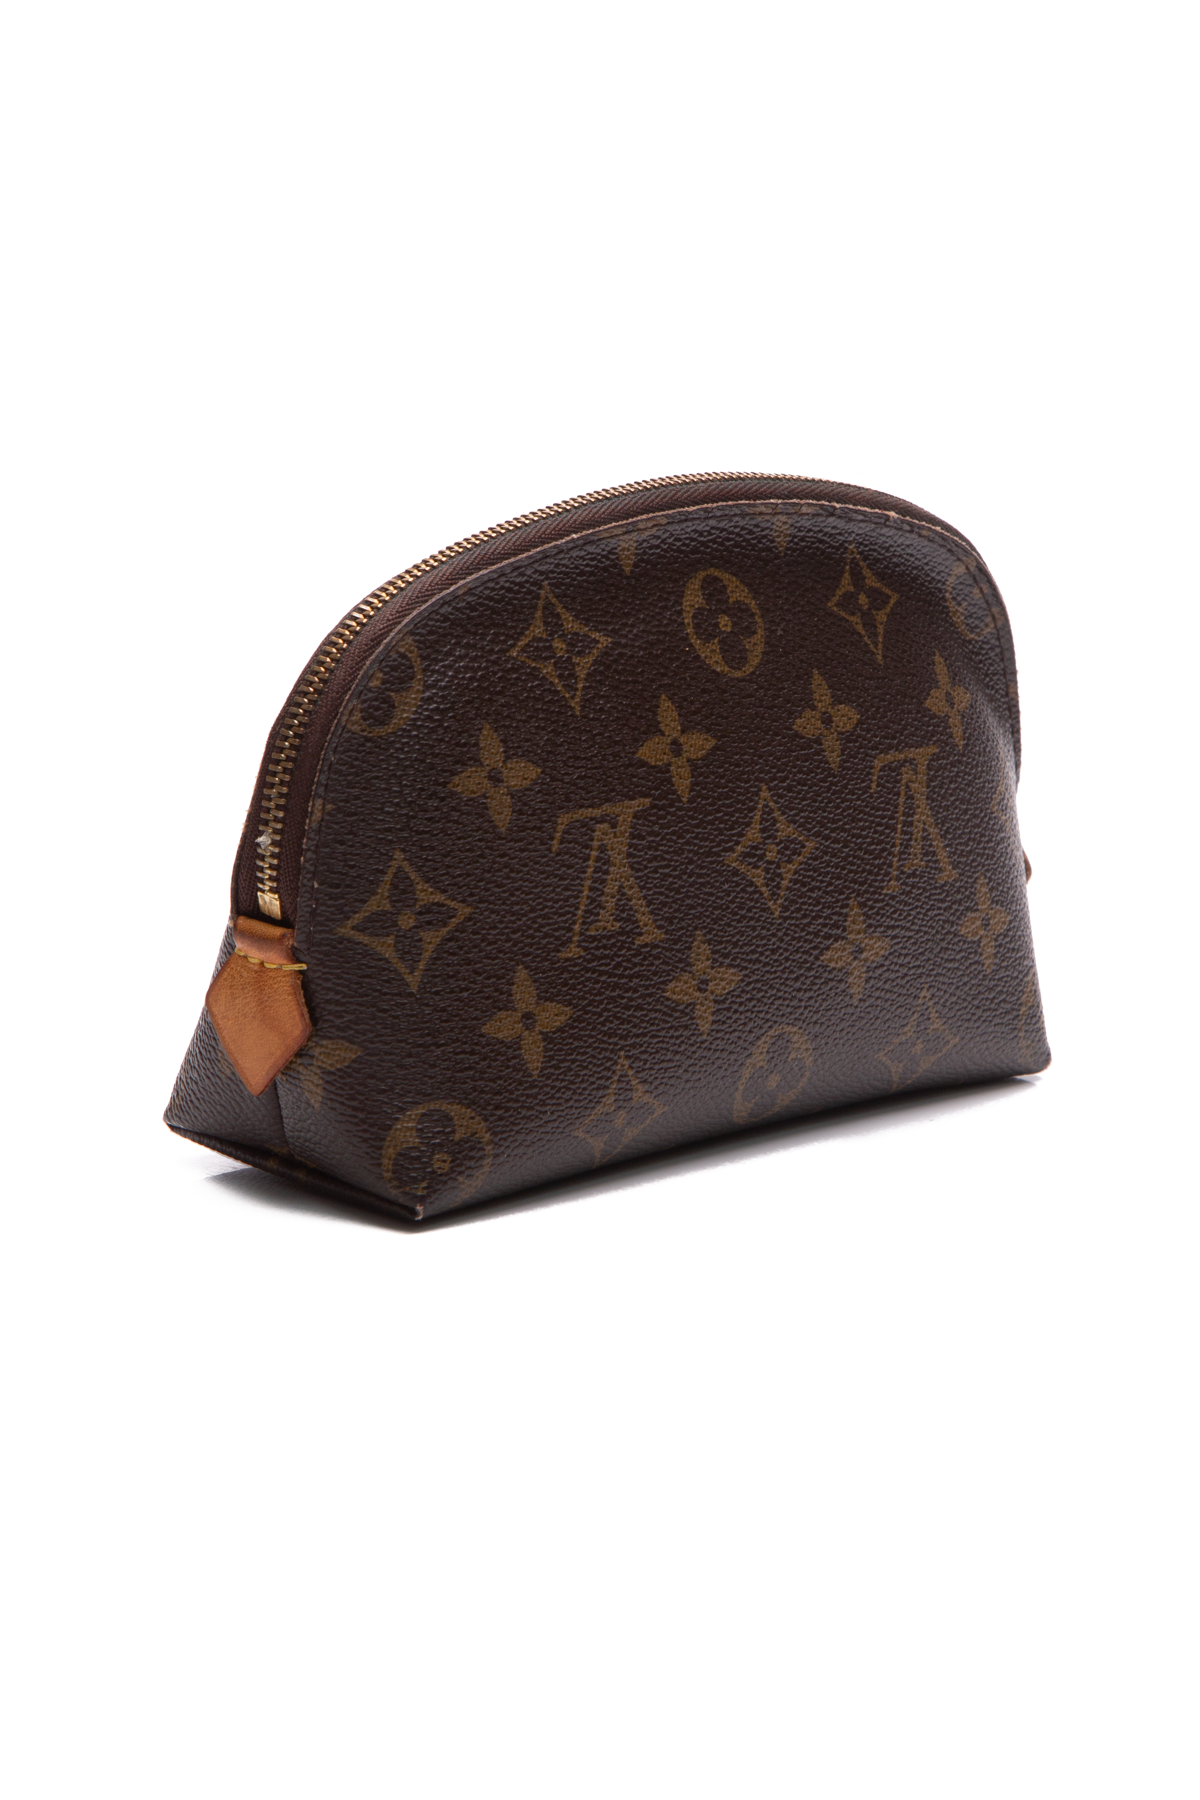 Louis Vuitton Cosmetics Pouch - Couture USA